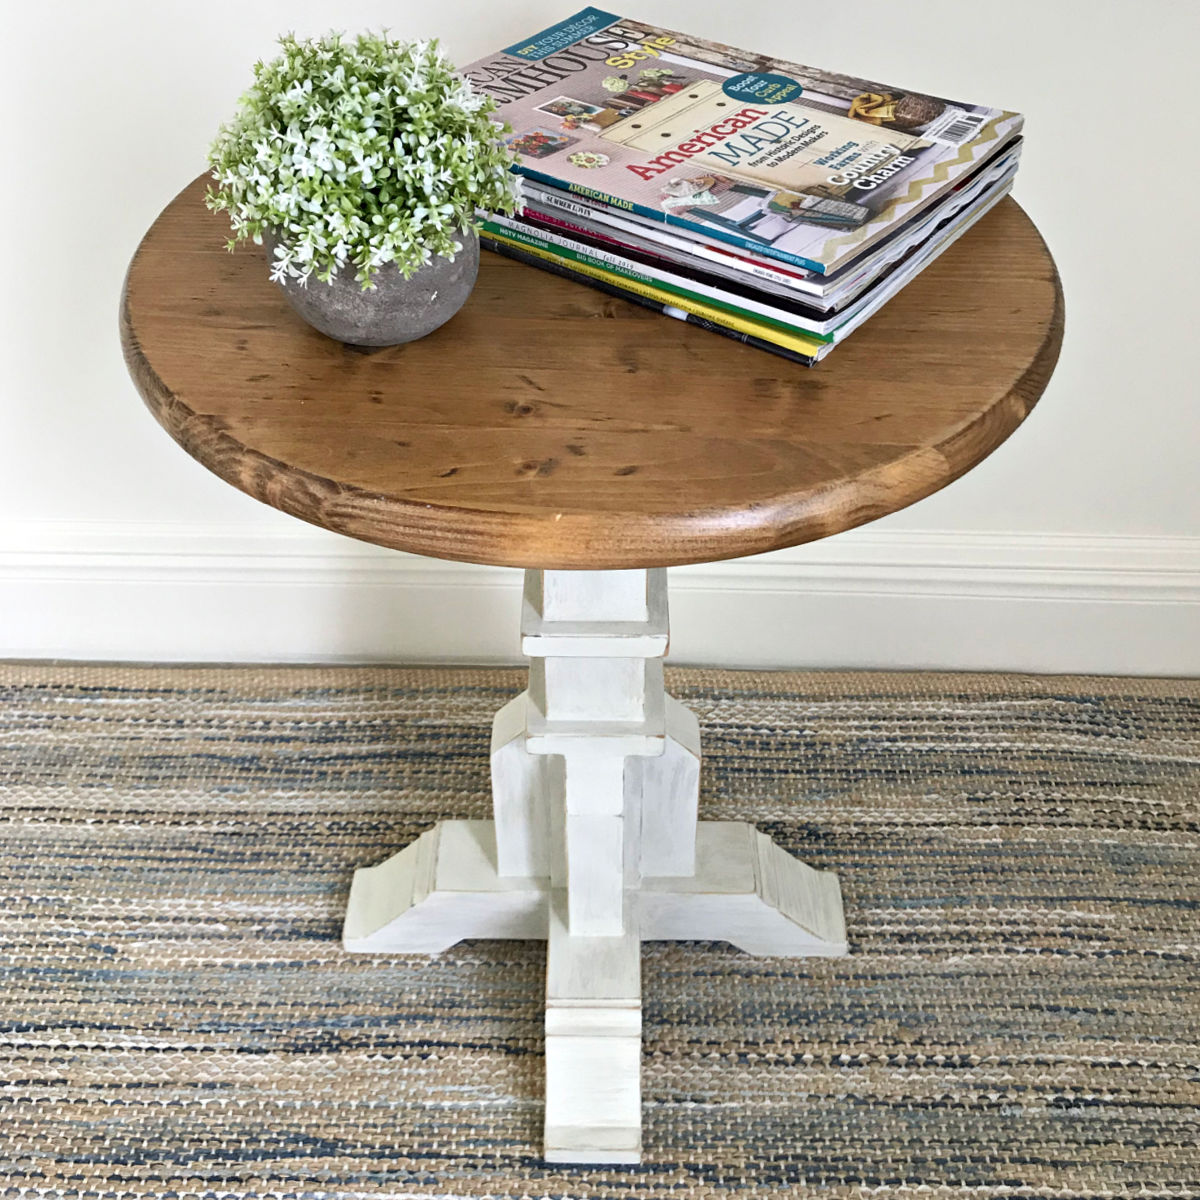 Diy Side Table Woodworking Plan 50 Build Abbotts At Home